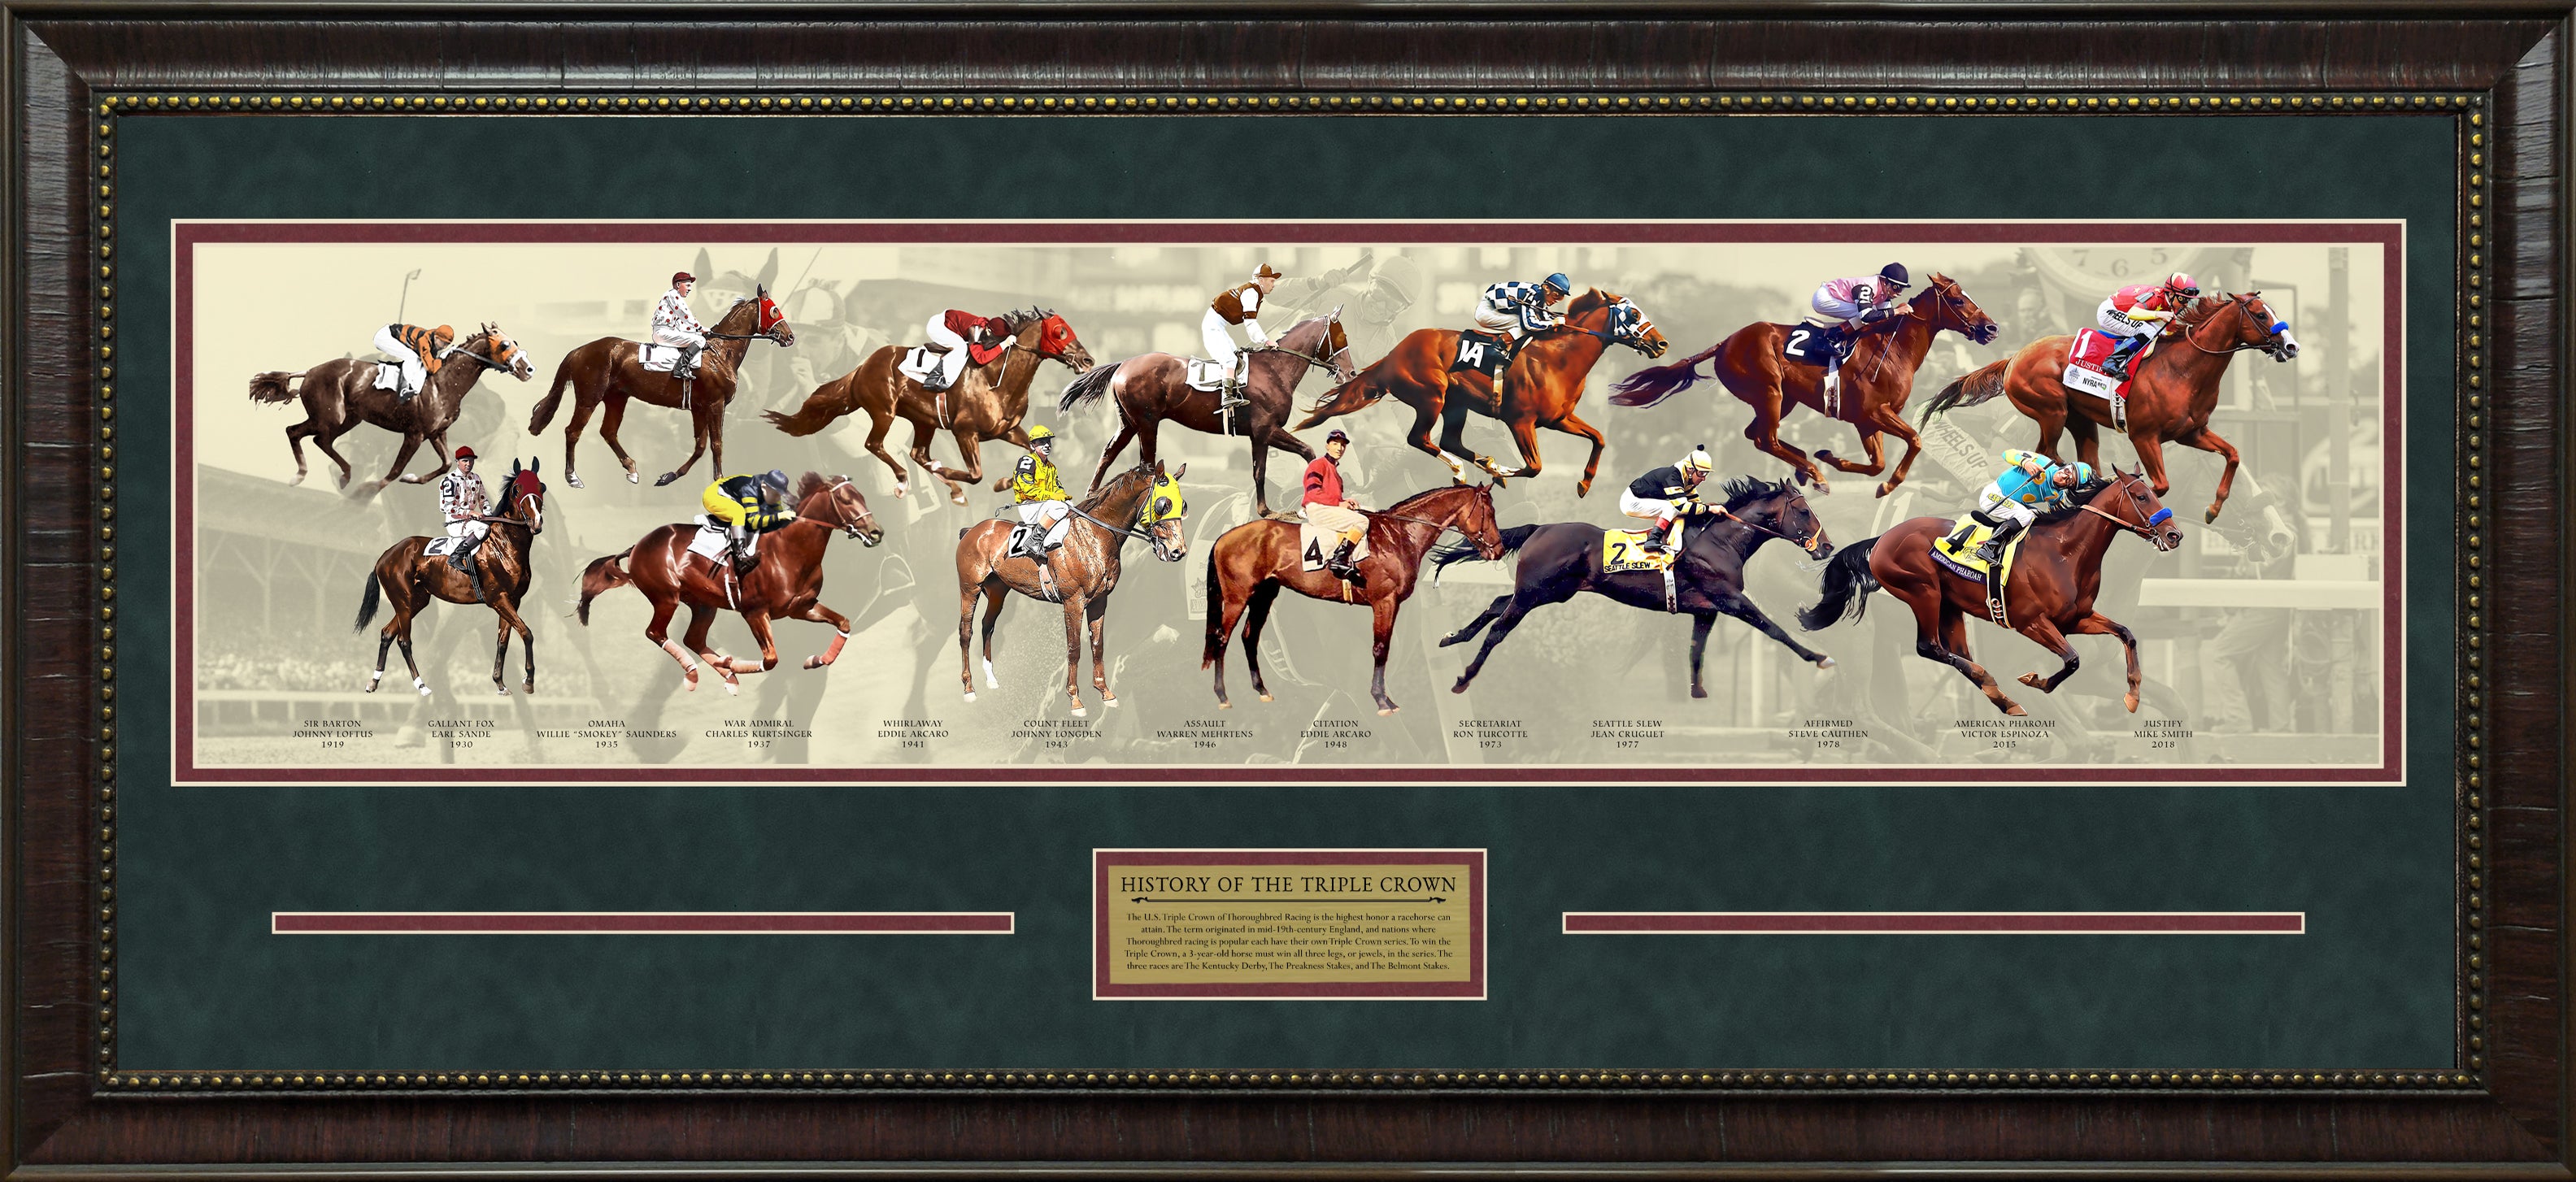 History of the Triple Crown Timeline Panorama